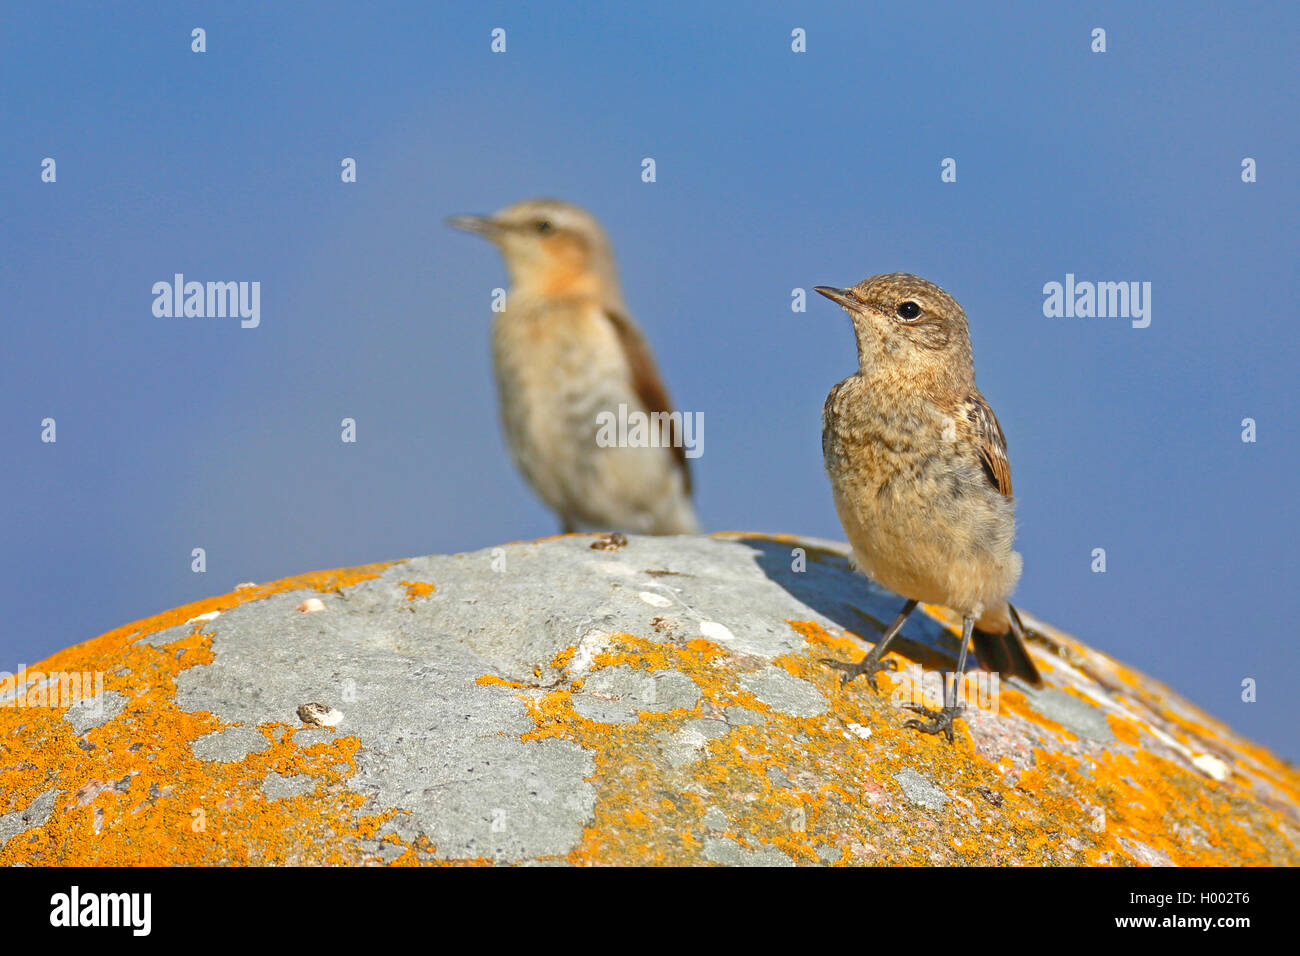 northern wheatear (Oenanthe oenanthe), two juvenile birds standing on a stone, Sweden, Oeland Stock Photo